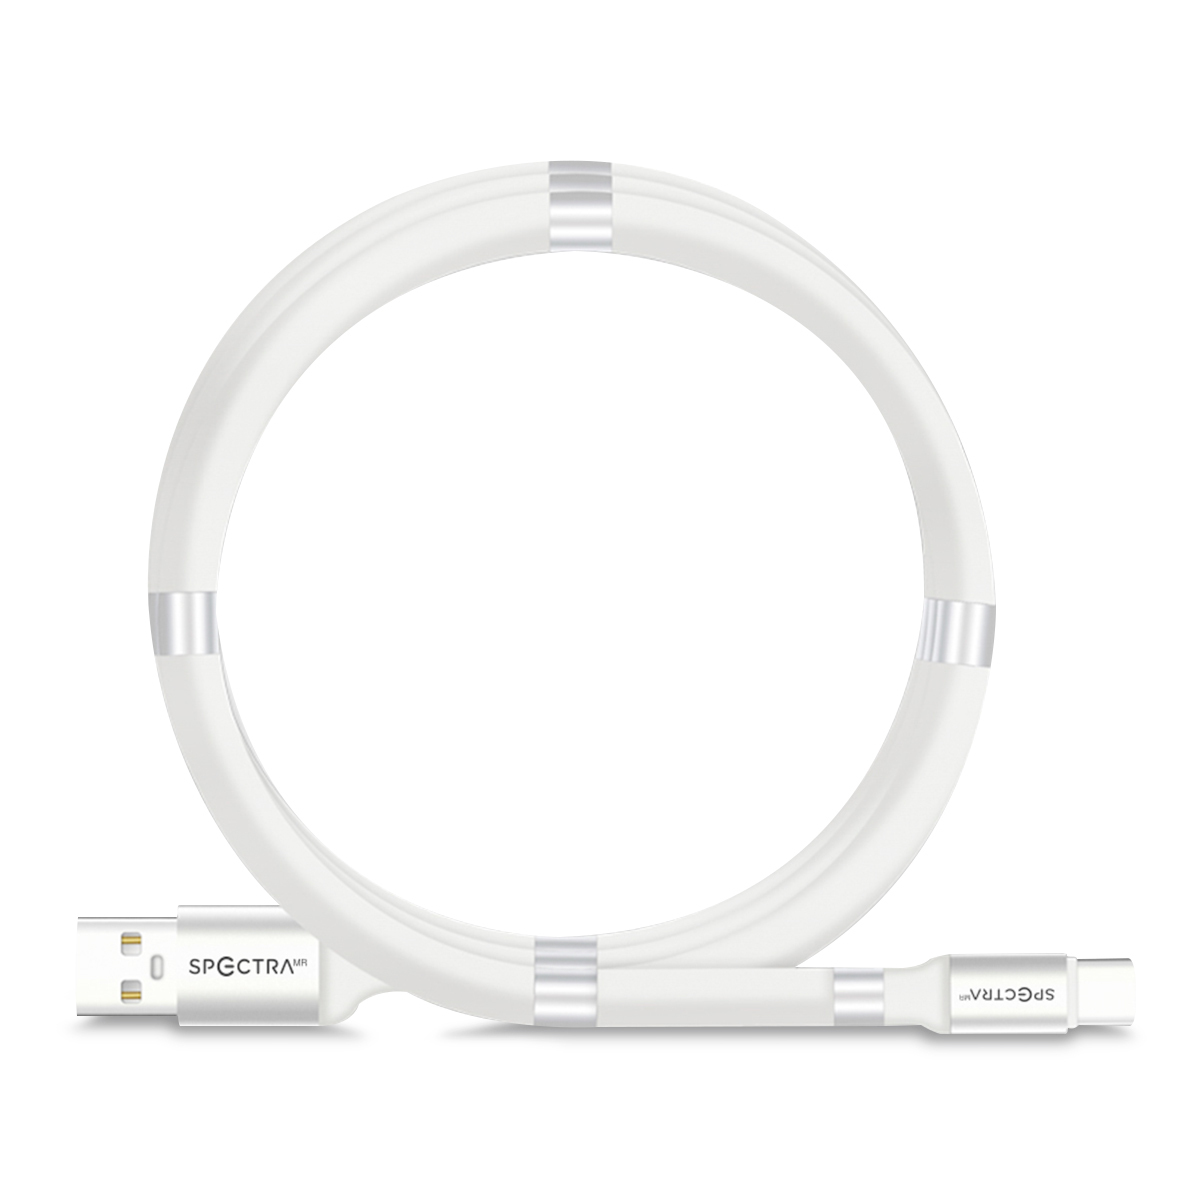 Cable USB a USB Tipo C Spectra M201 1 metro Blanco | Office Depot Mexico